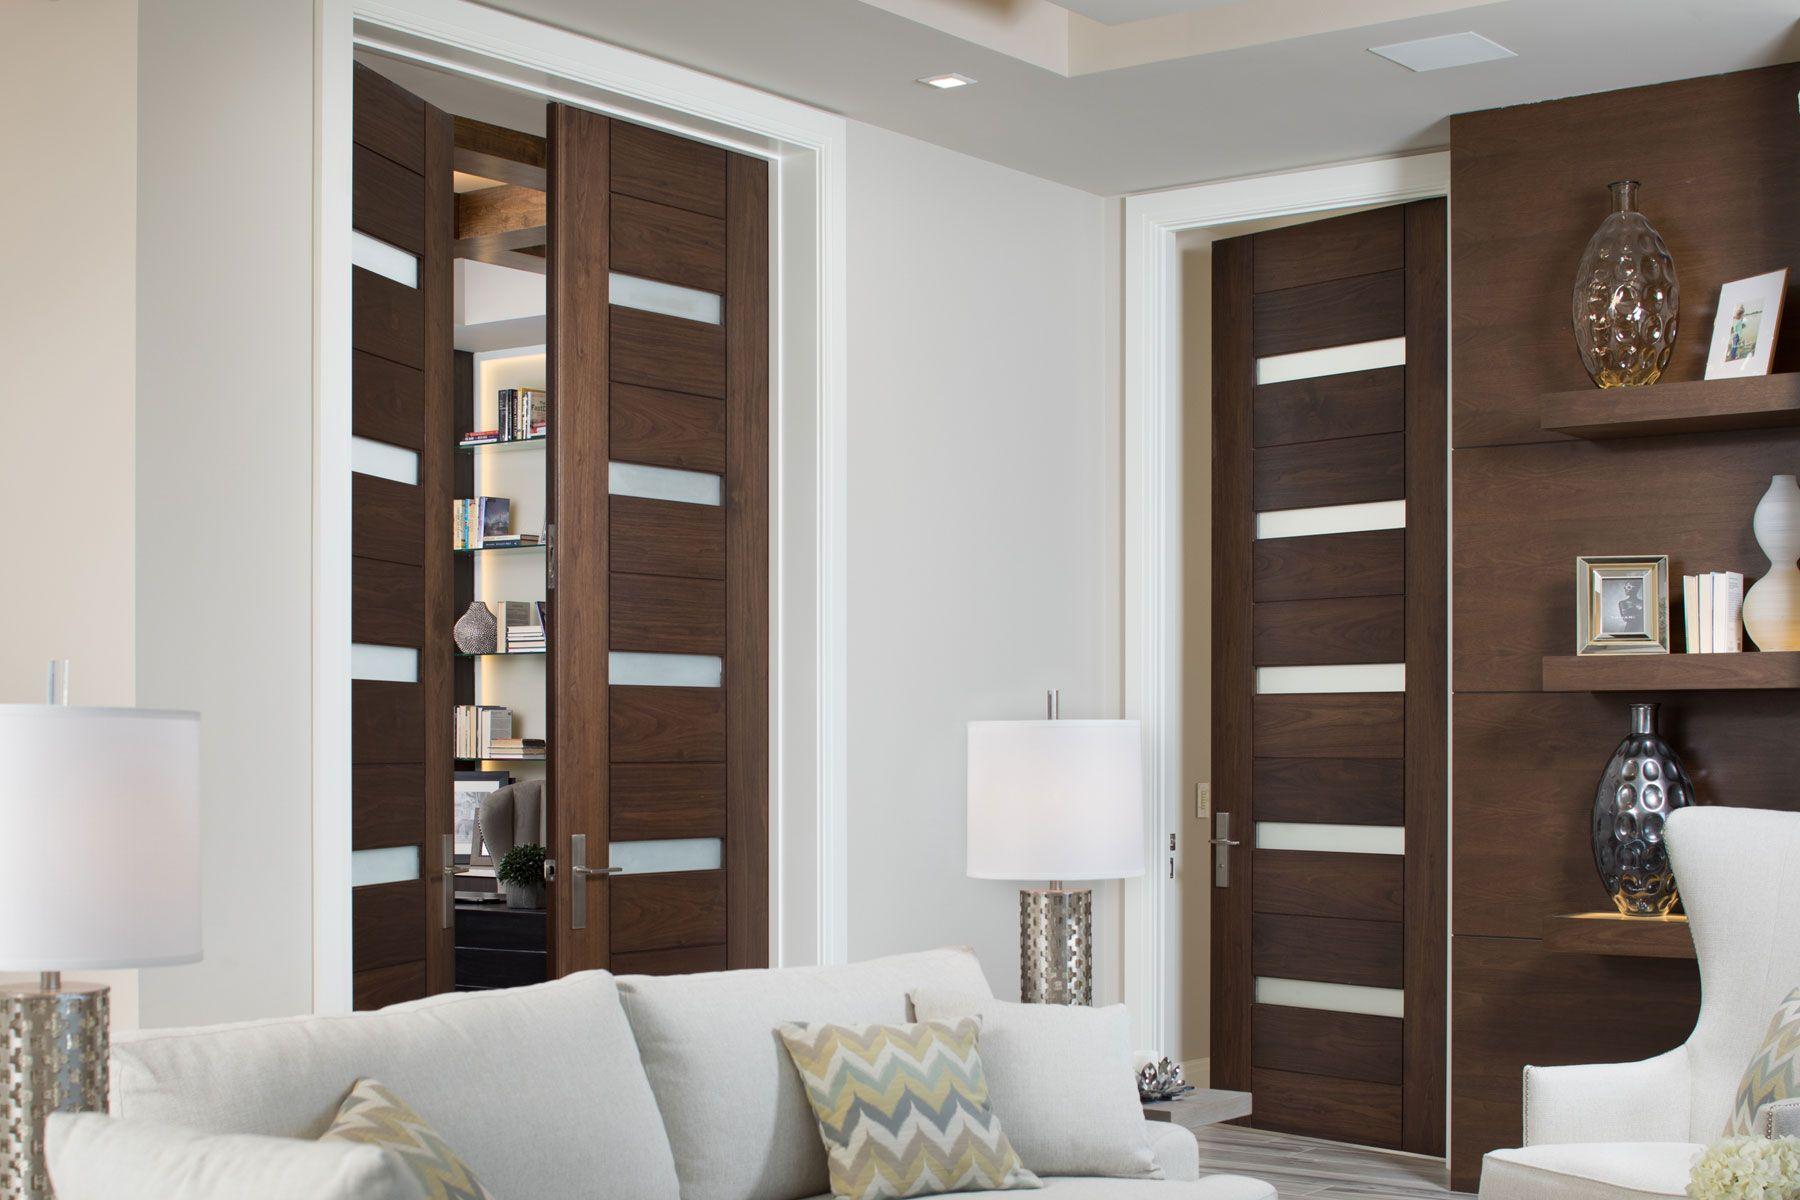 dual dark artistic barn doors with four frosted glass inserts